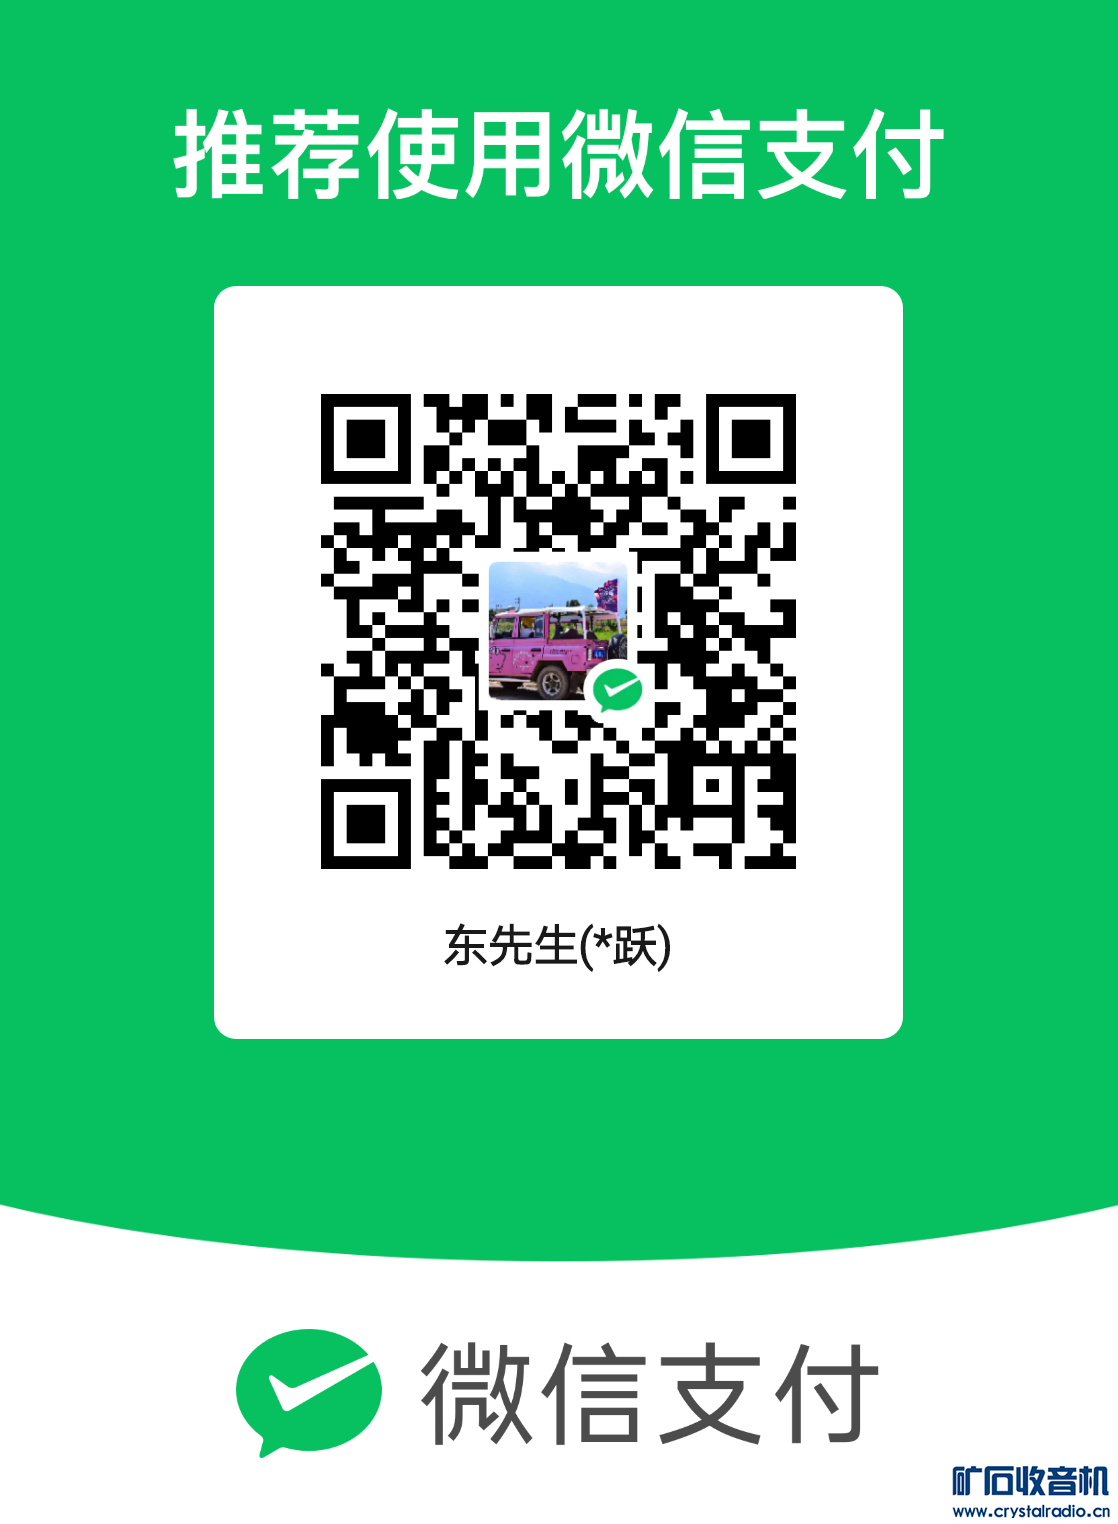 mm_facetoface_collect_qrcode_1709515624058.png